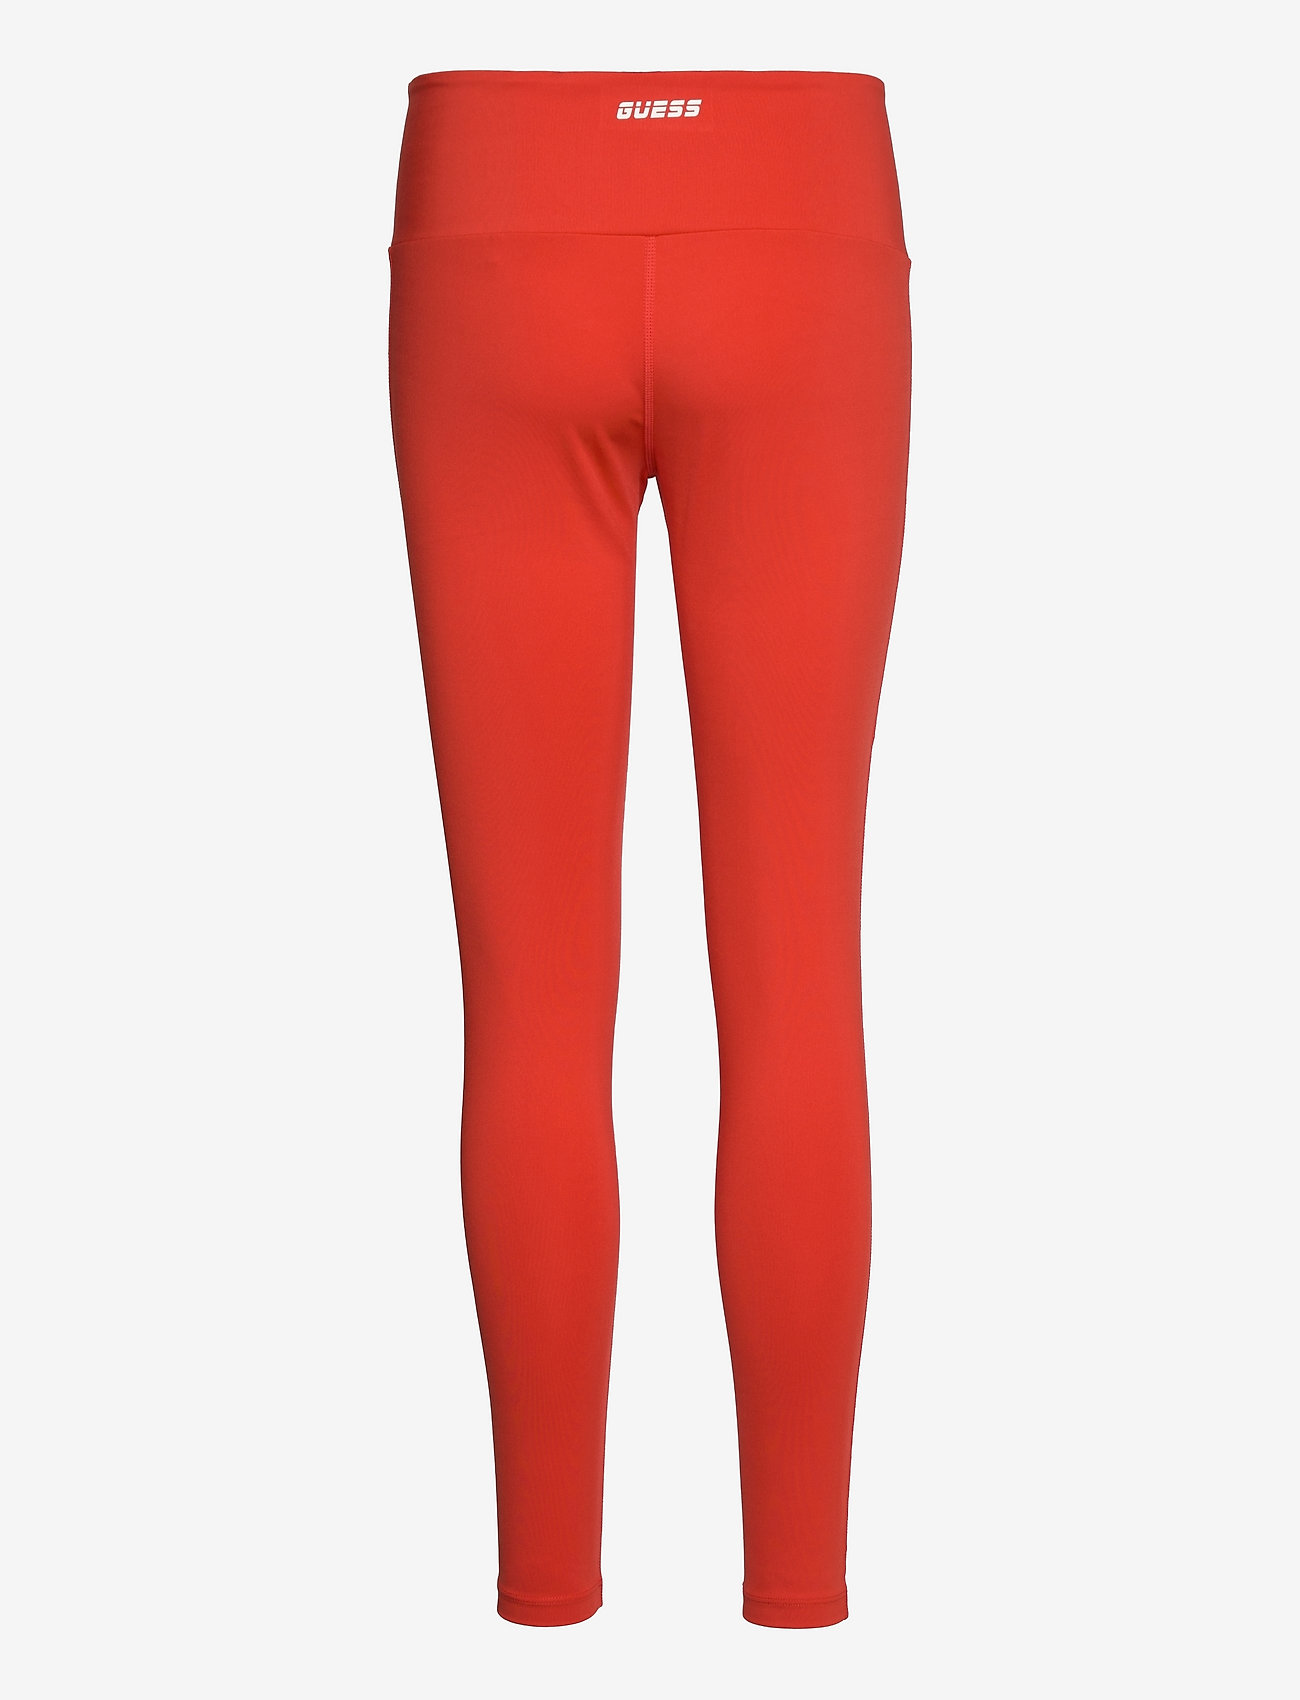 Guess Activewear - AGATHA LEGGINGS 4/4 - trænings- & løbetights - ardent red - 1